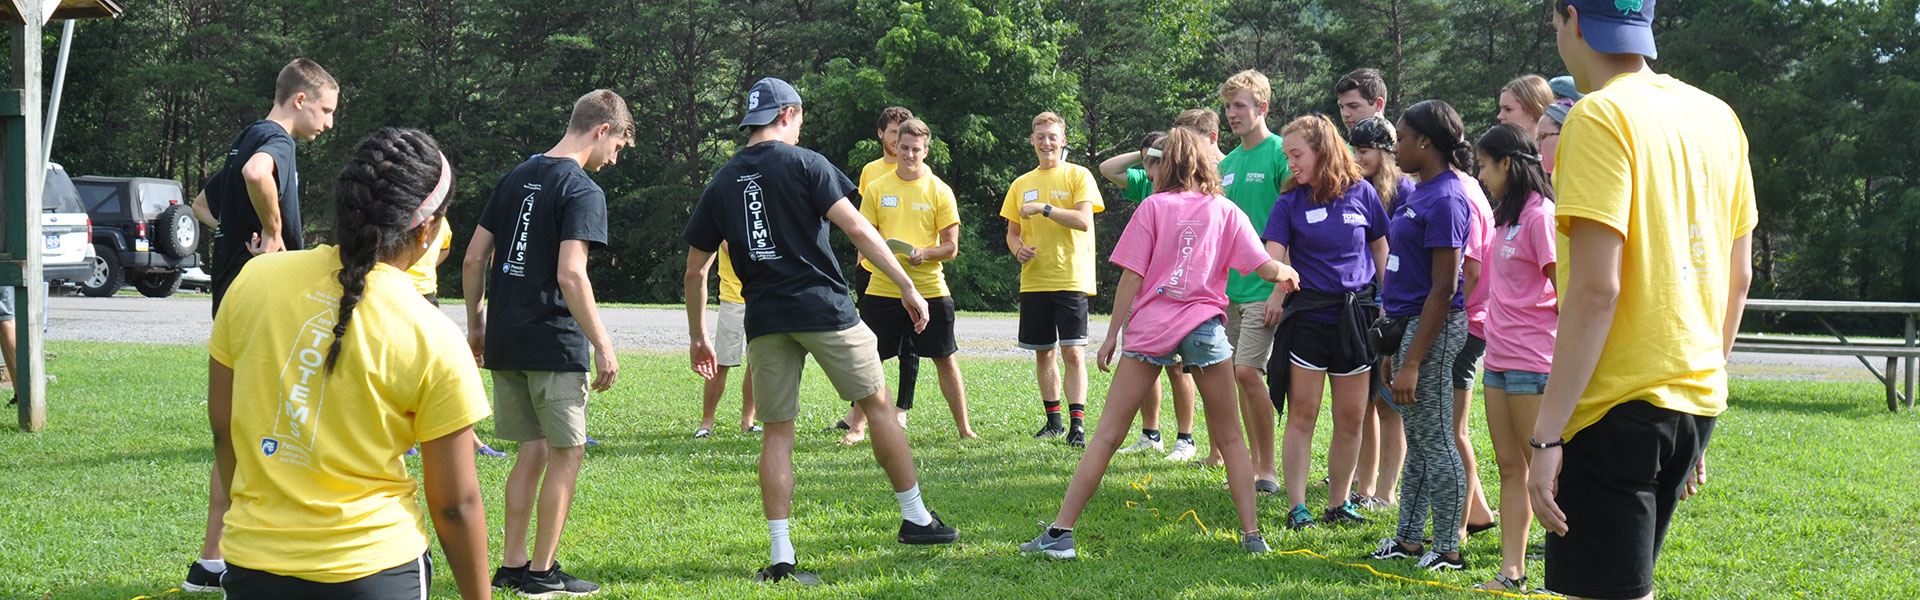 Orientation games at TOTEMS